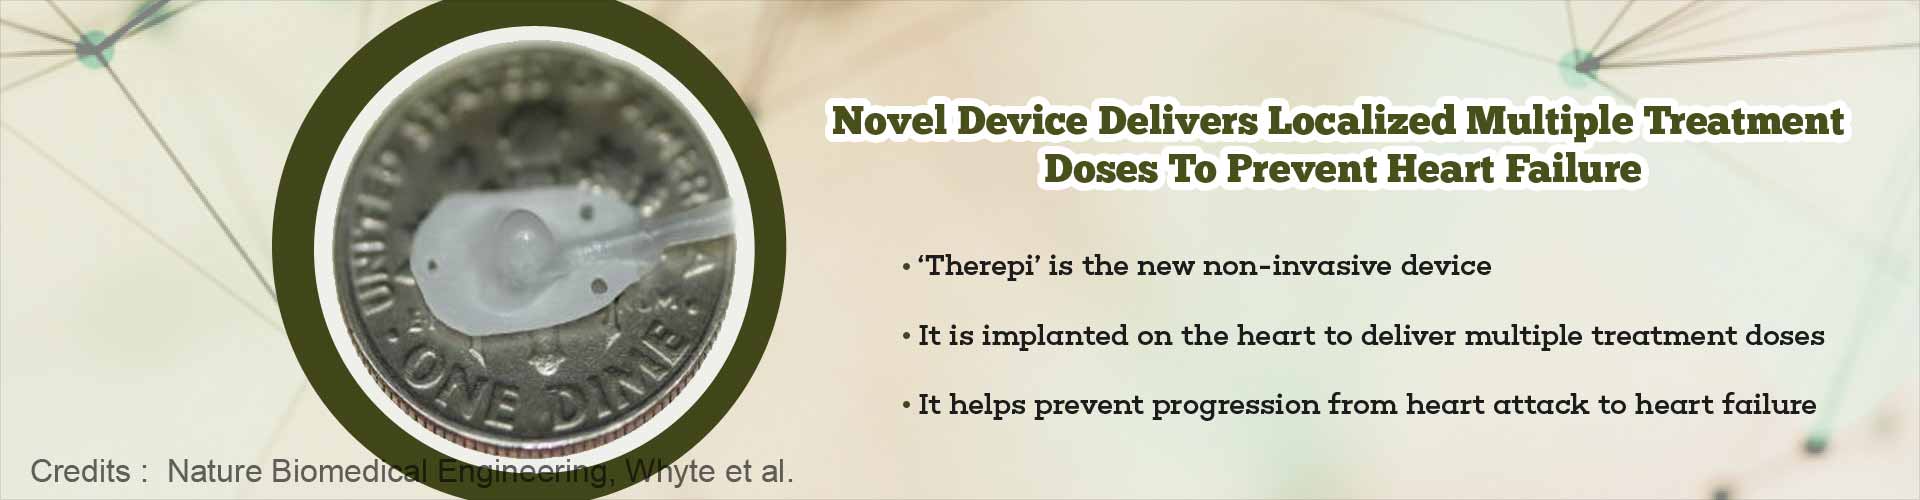 Novel device delivers localized multiple treatment doses to prevent cardiac failure. 'Therepi' is the new non-invasive device. It is implanted on the heart to deliver multiple treatment doses. It helps prevent progression from heart attack to heart failure.